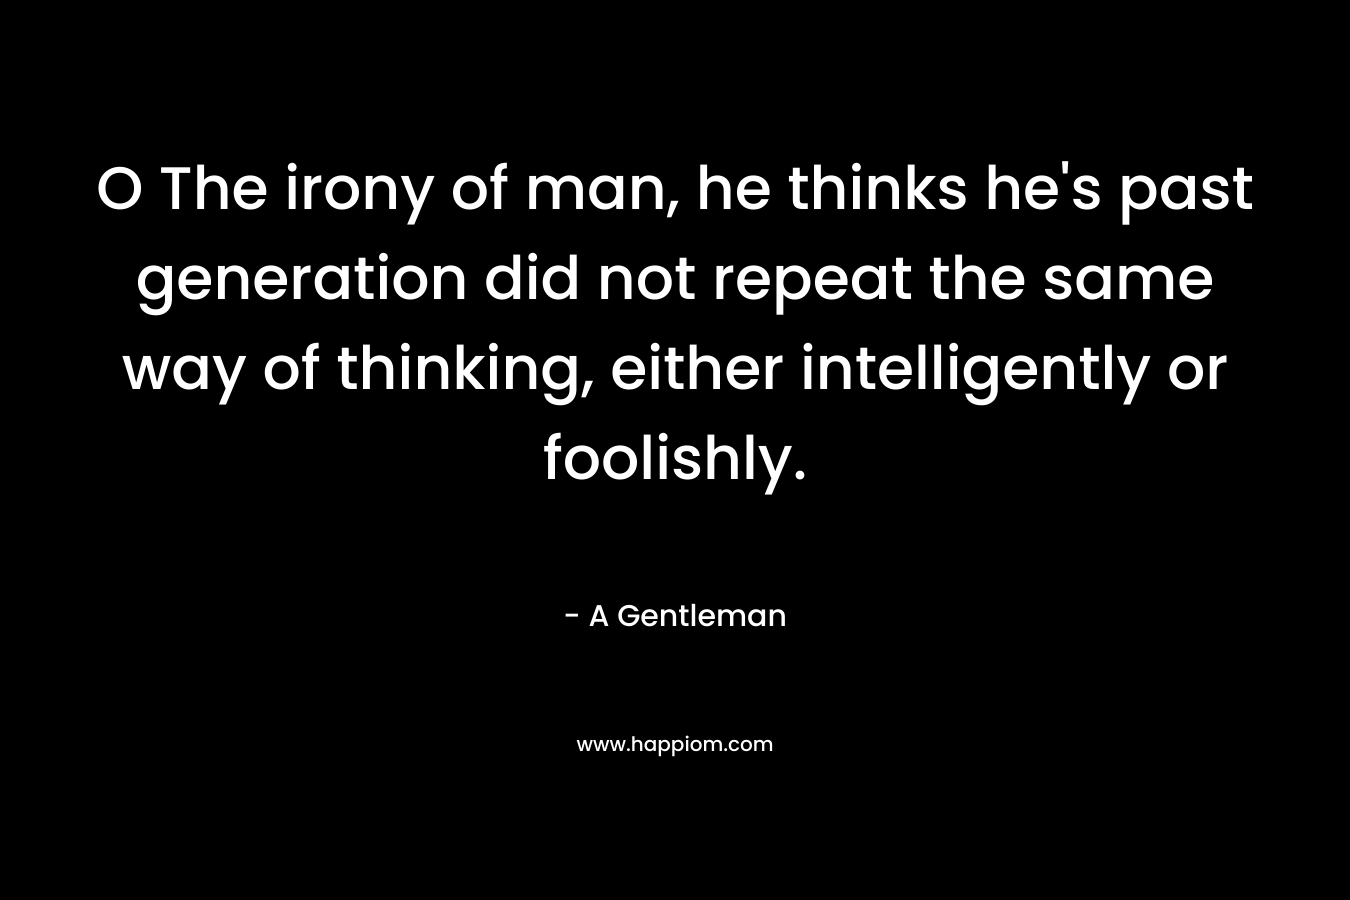 O The irony of man, he thinks he’s past generation did not repeat the same way of thinking, either intelligently or foolishly. – A Gentleman